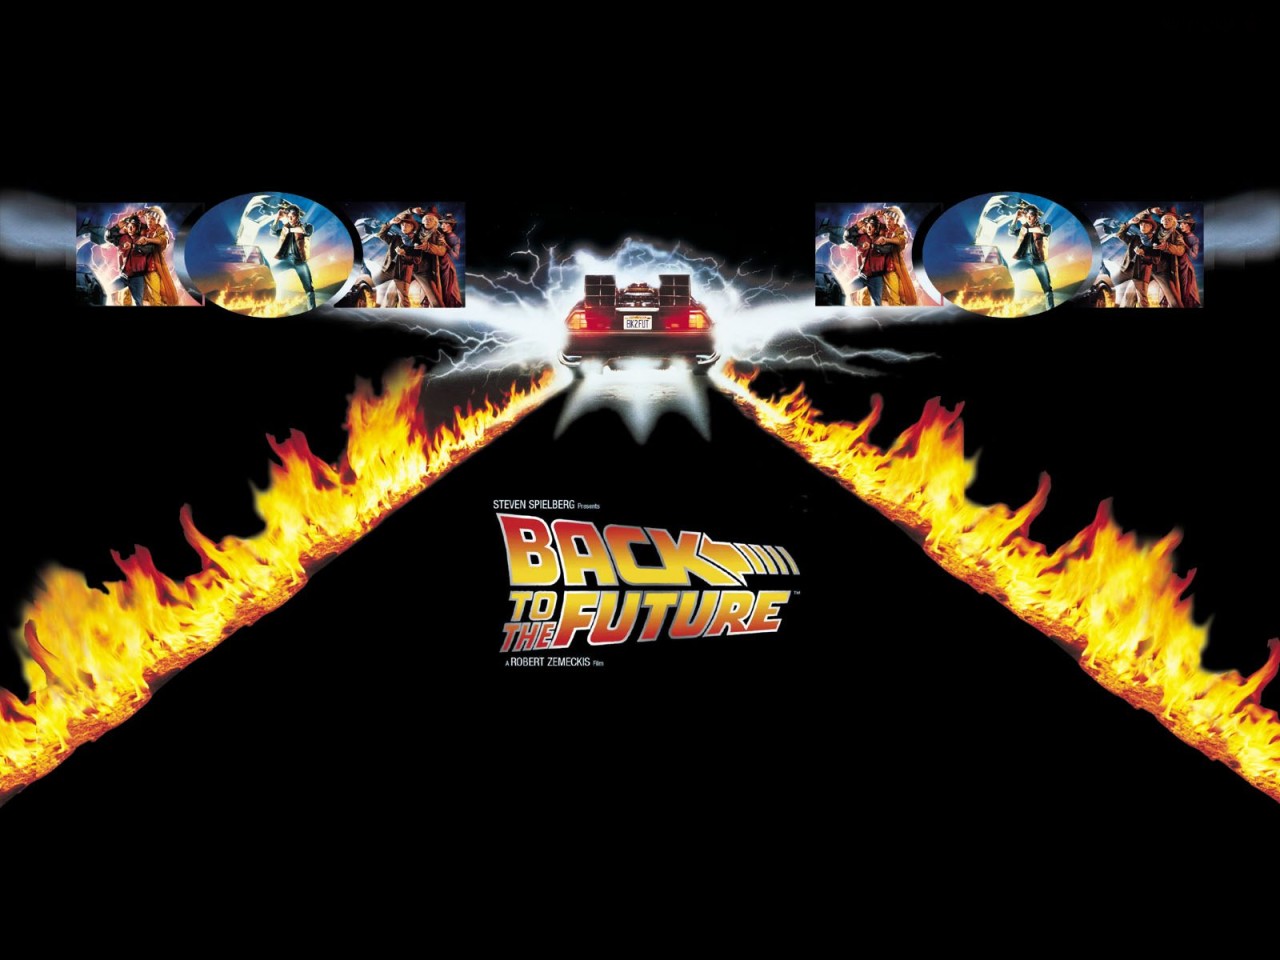 Previous, Movies - Films B - Back to the Future wallpaper